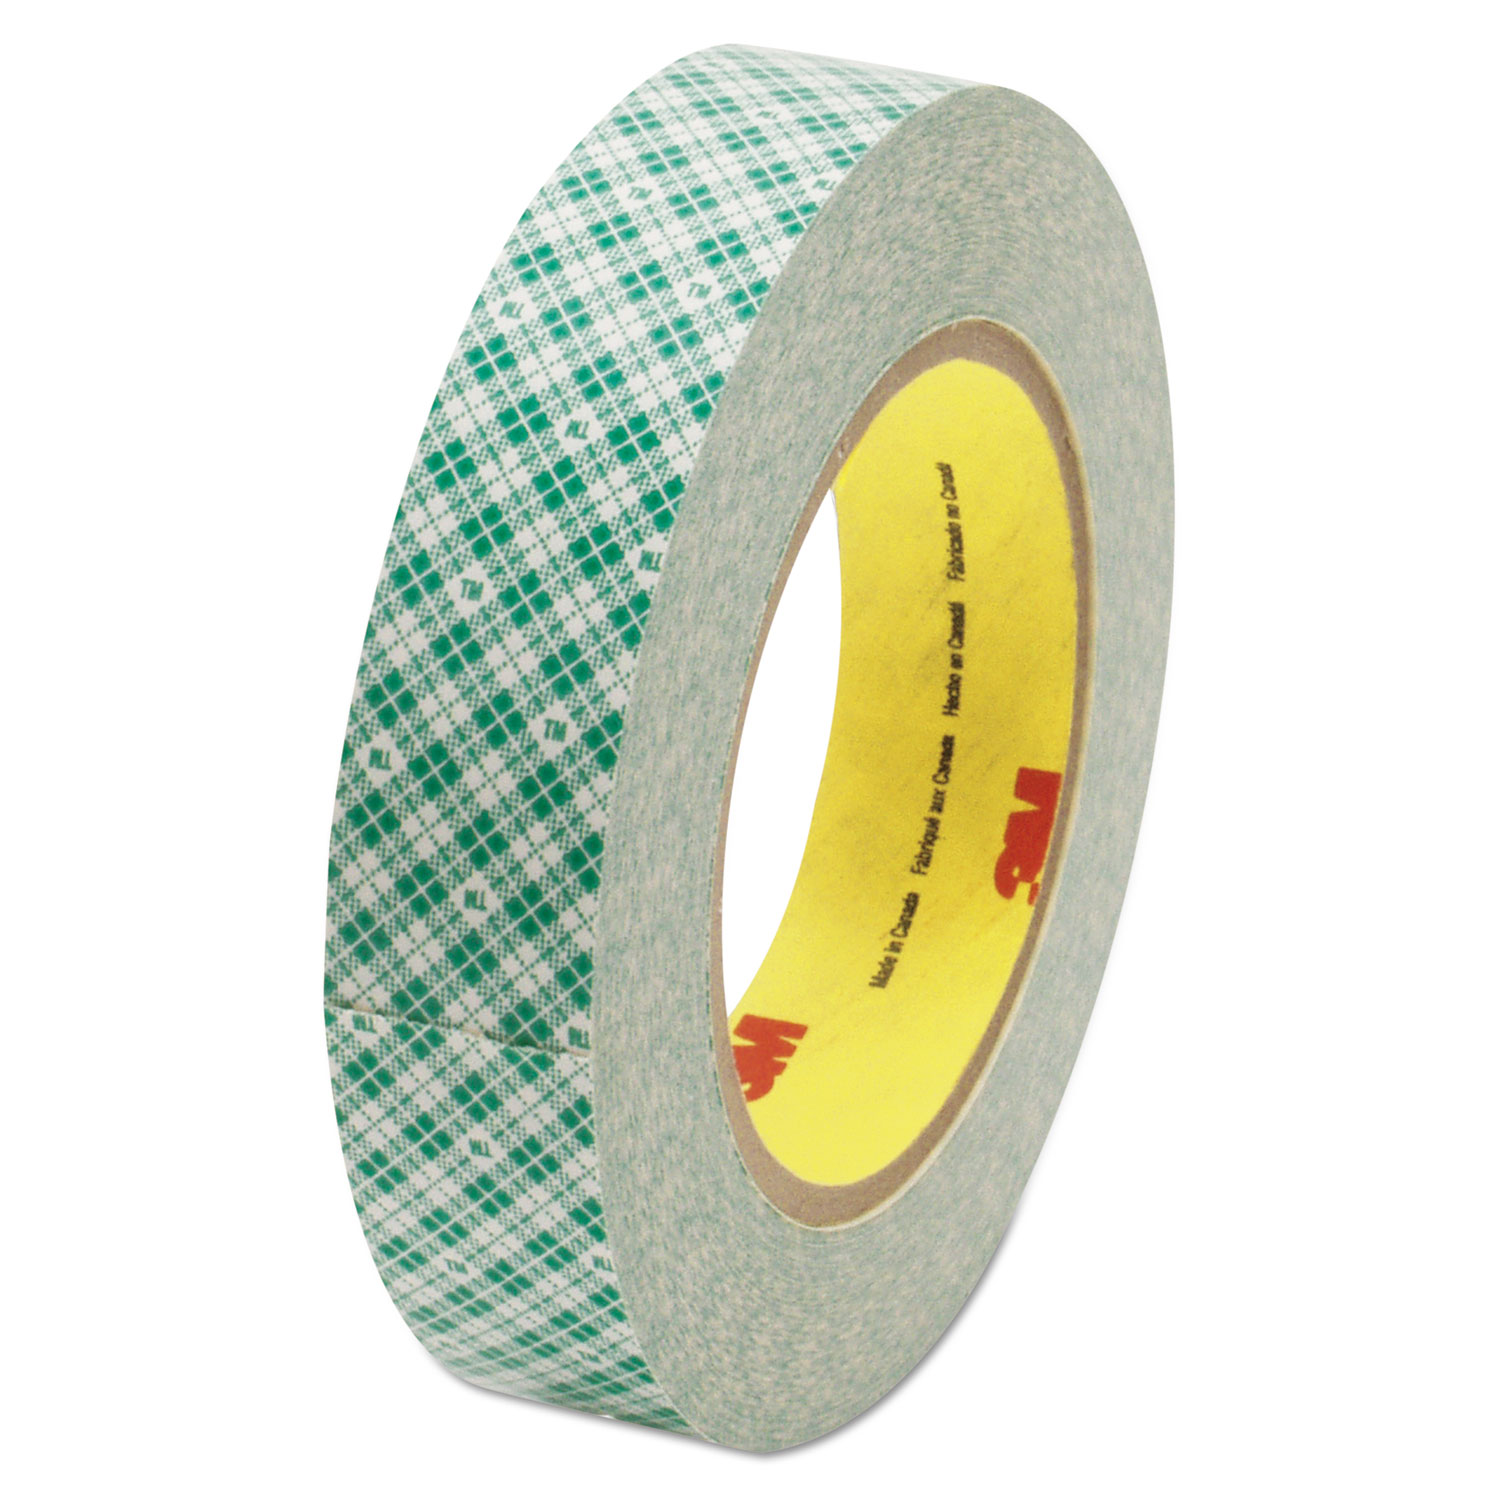 3M MMM410M Double-Coated Tissue Tape, 1" x 36yds, 3" Core, White